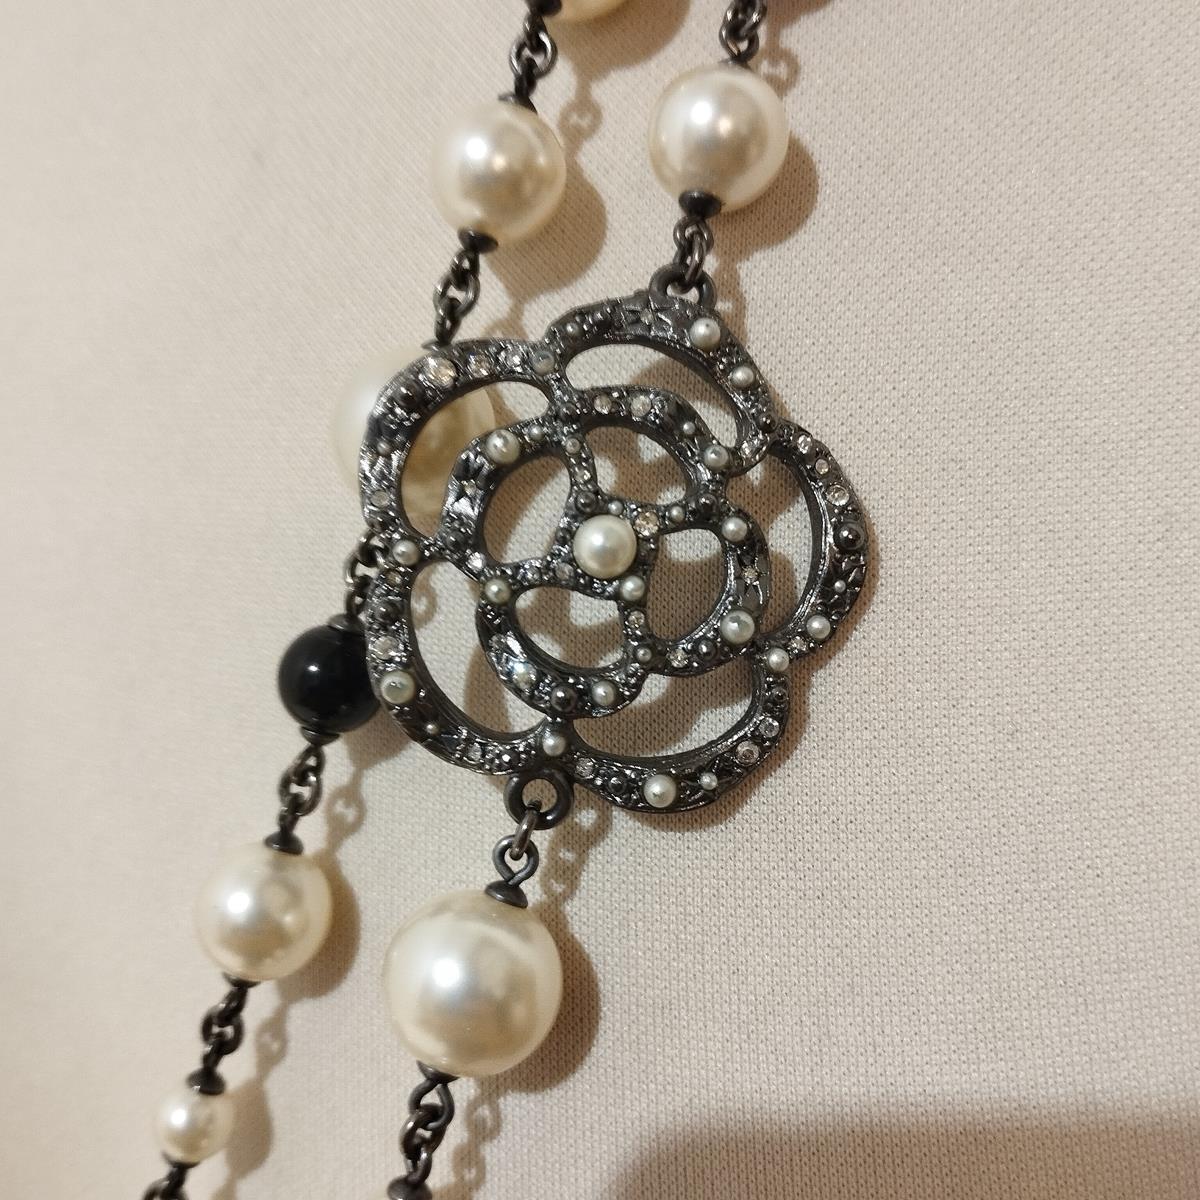 Women's Chanel Long Pearls Necklace